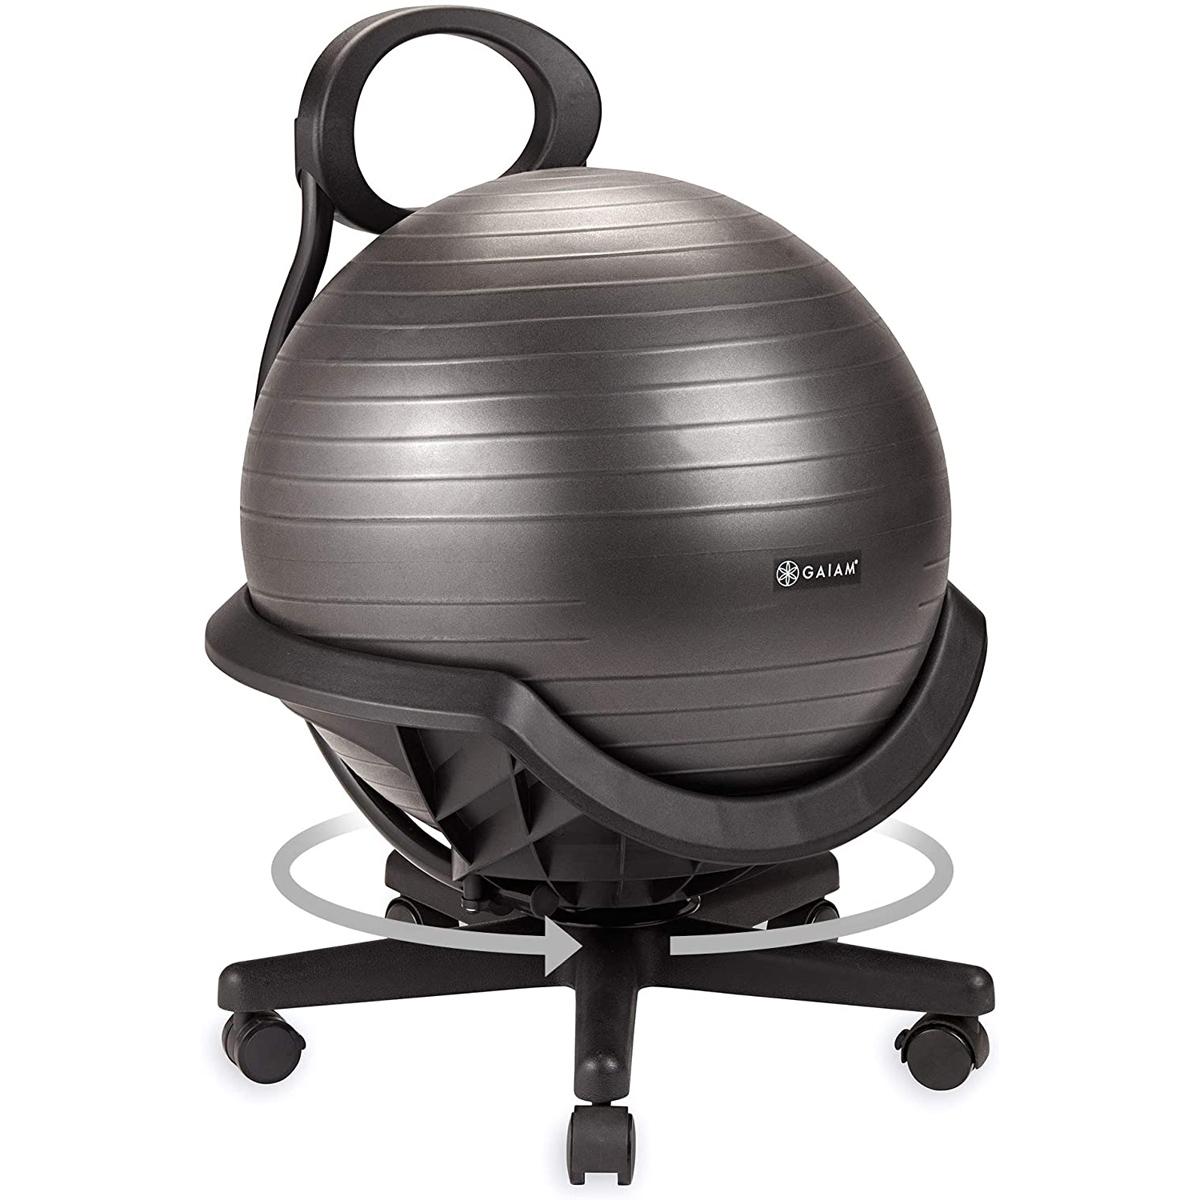 Gaiam Ultimate Balance Ball Chair for $69.98 Shipped